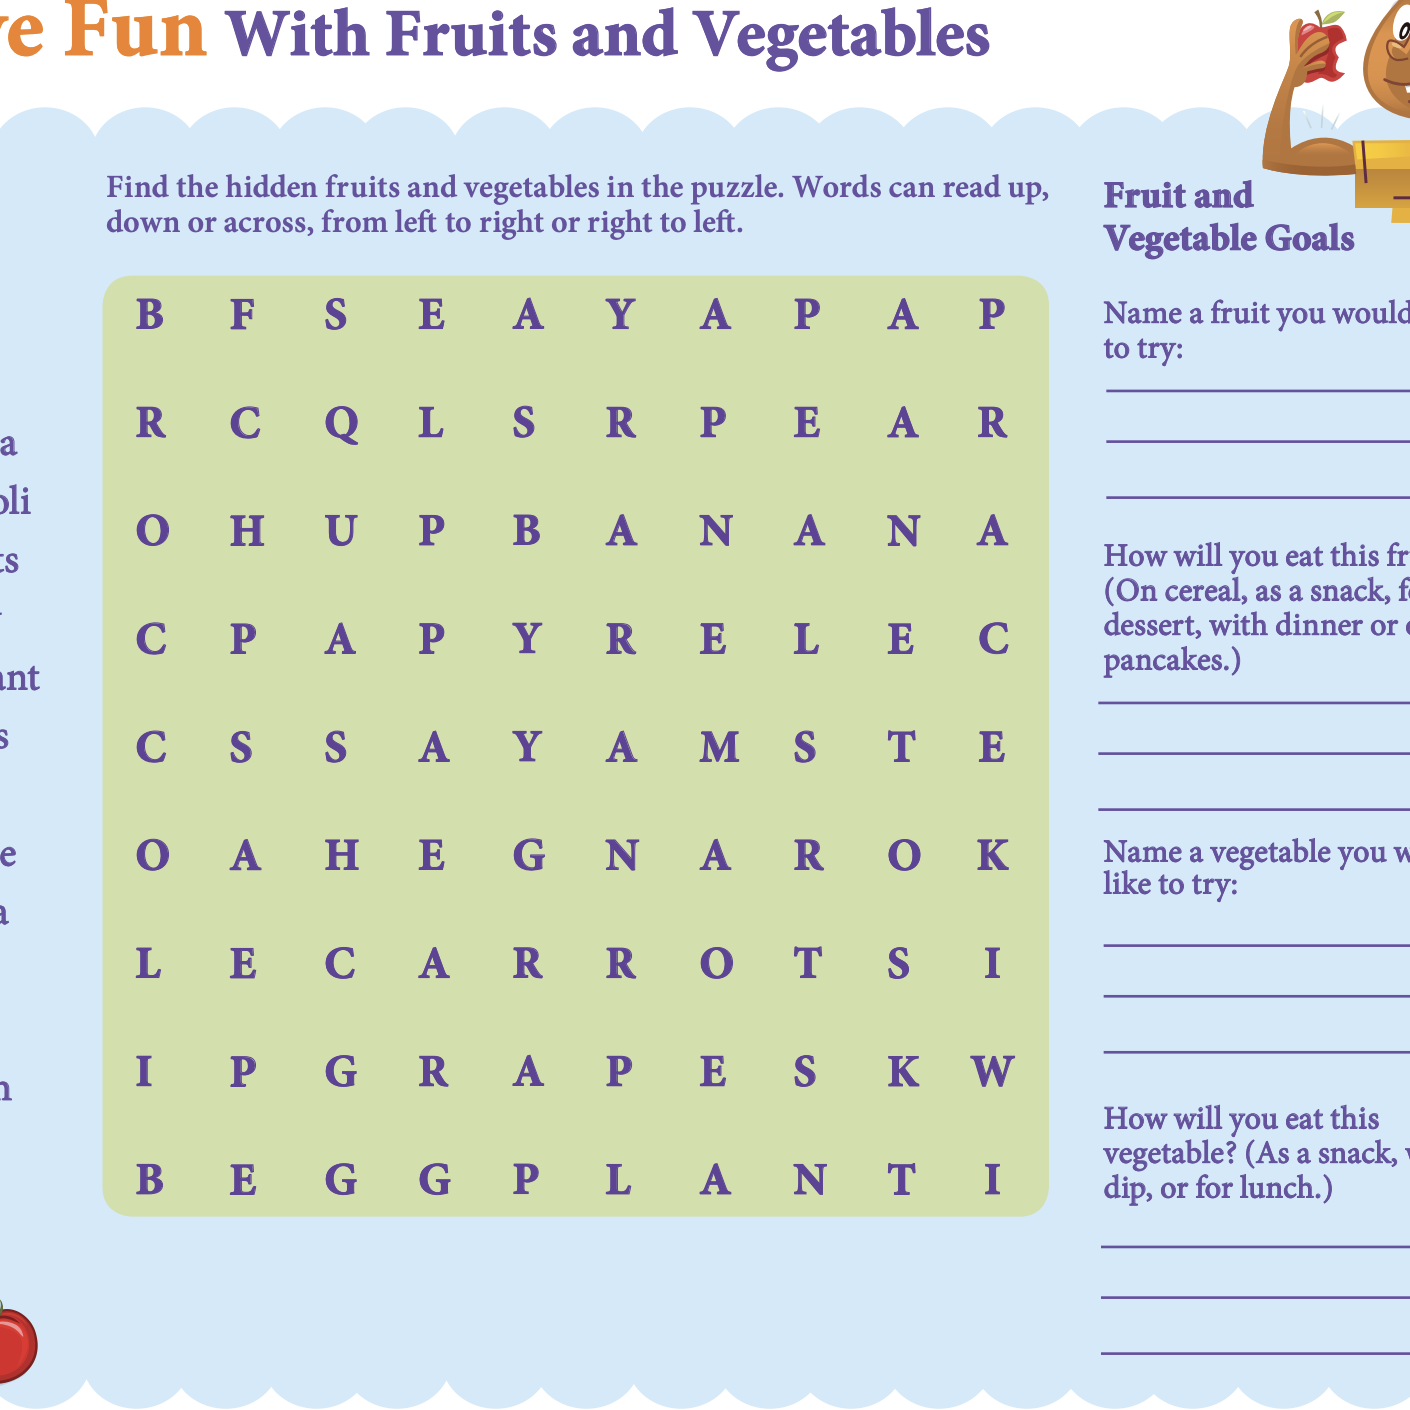 Have Fun with Fruits and Vegetables Game